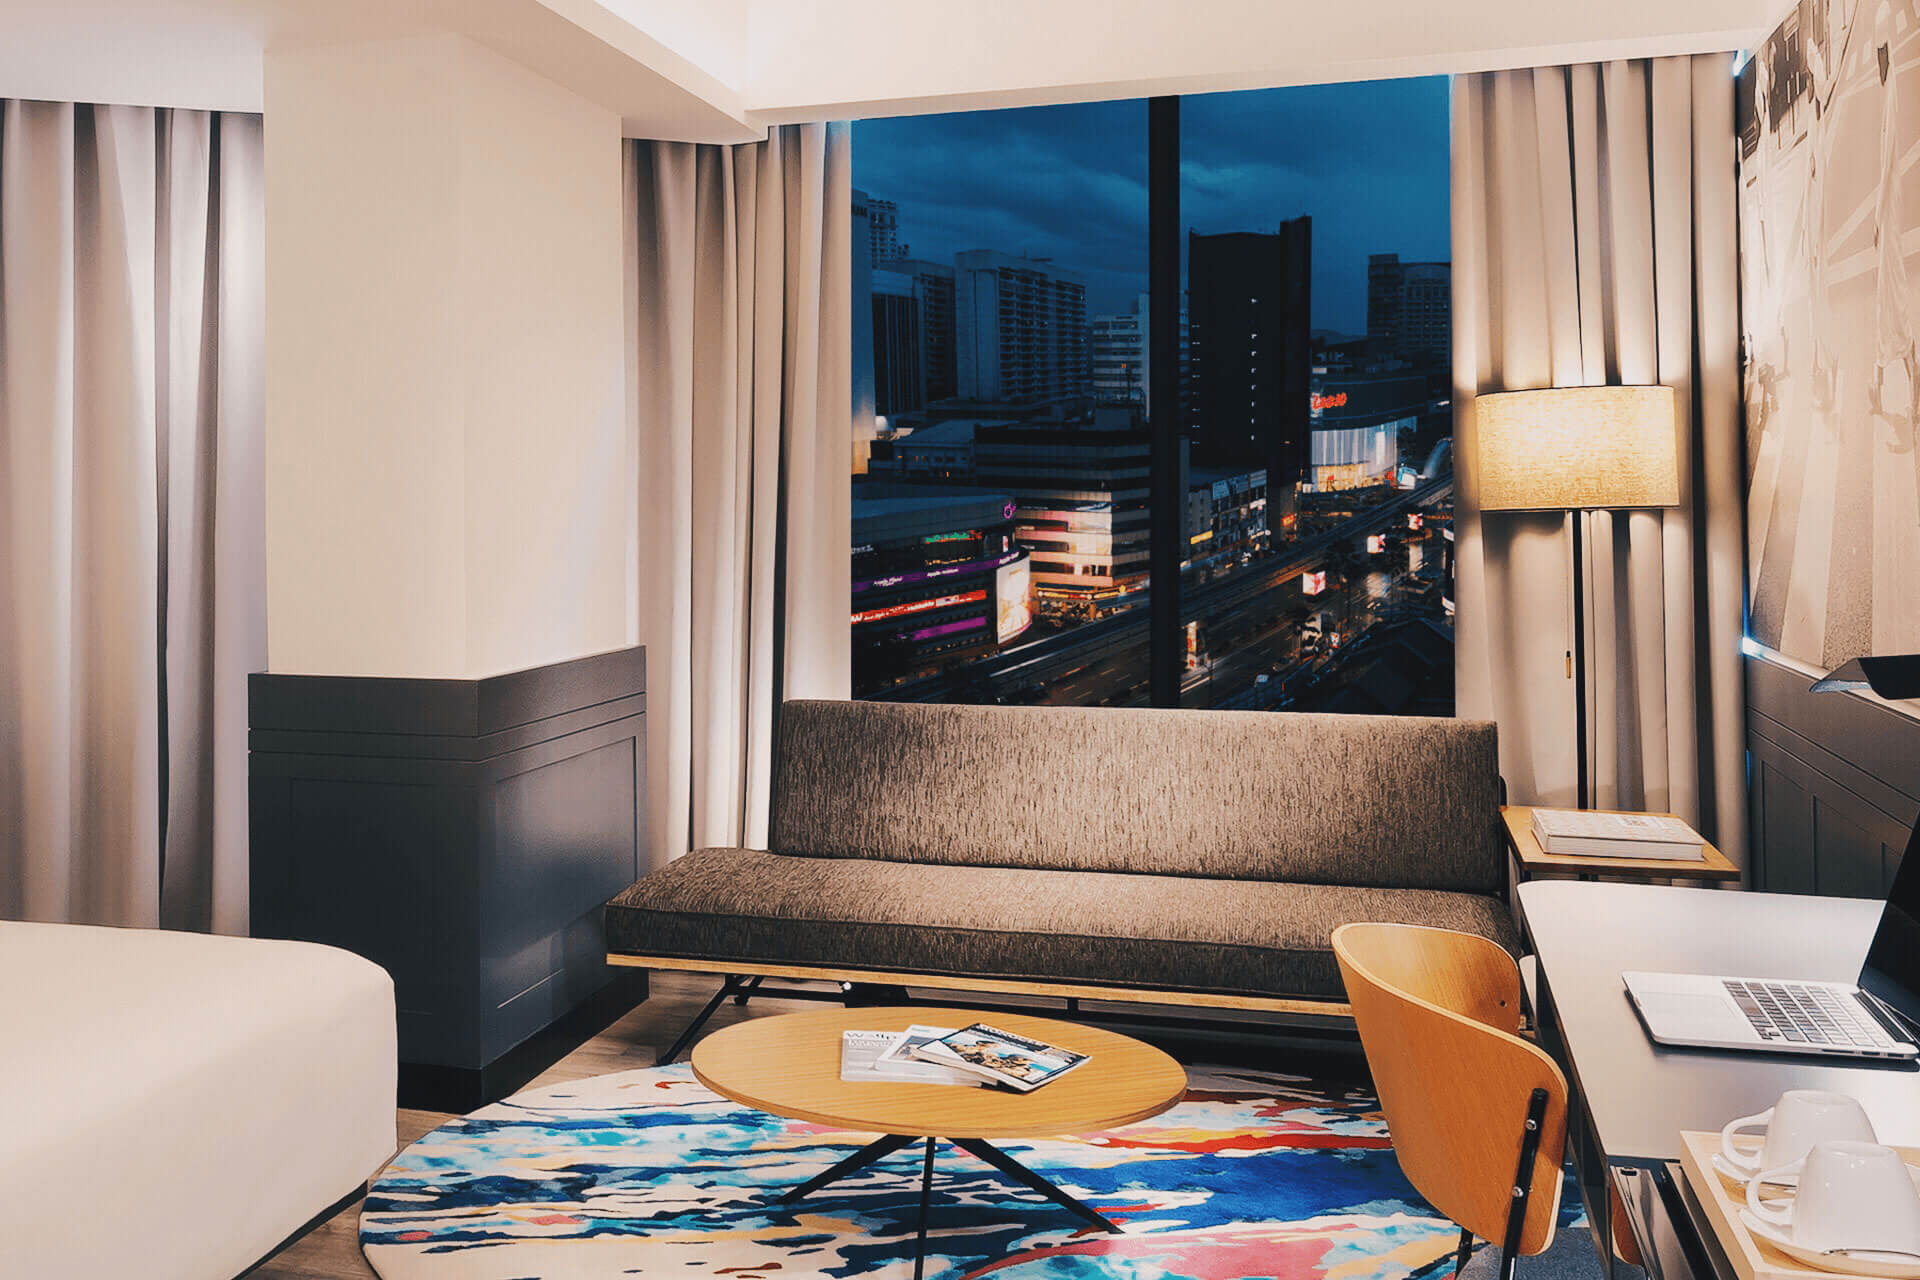 Superior Deluxe room interior with Bukit Bintang city night view